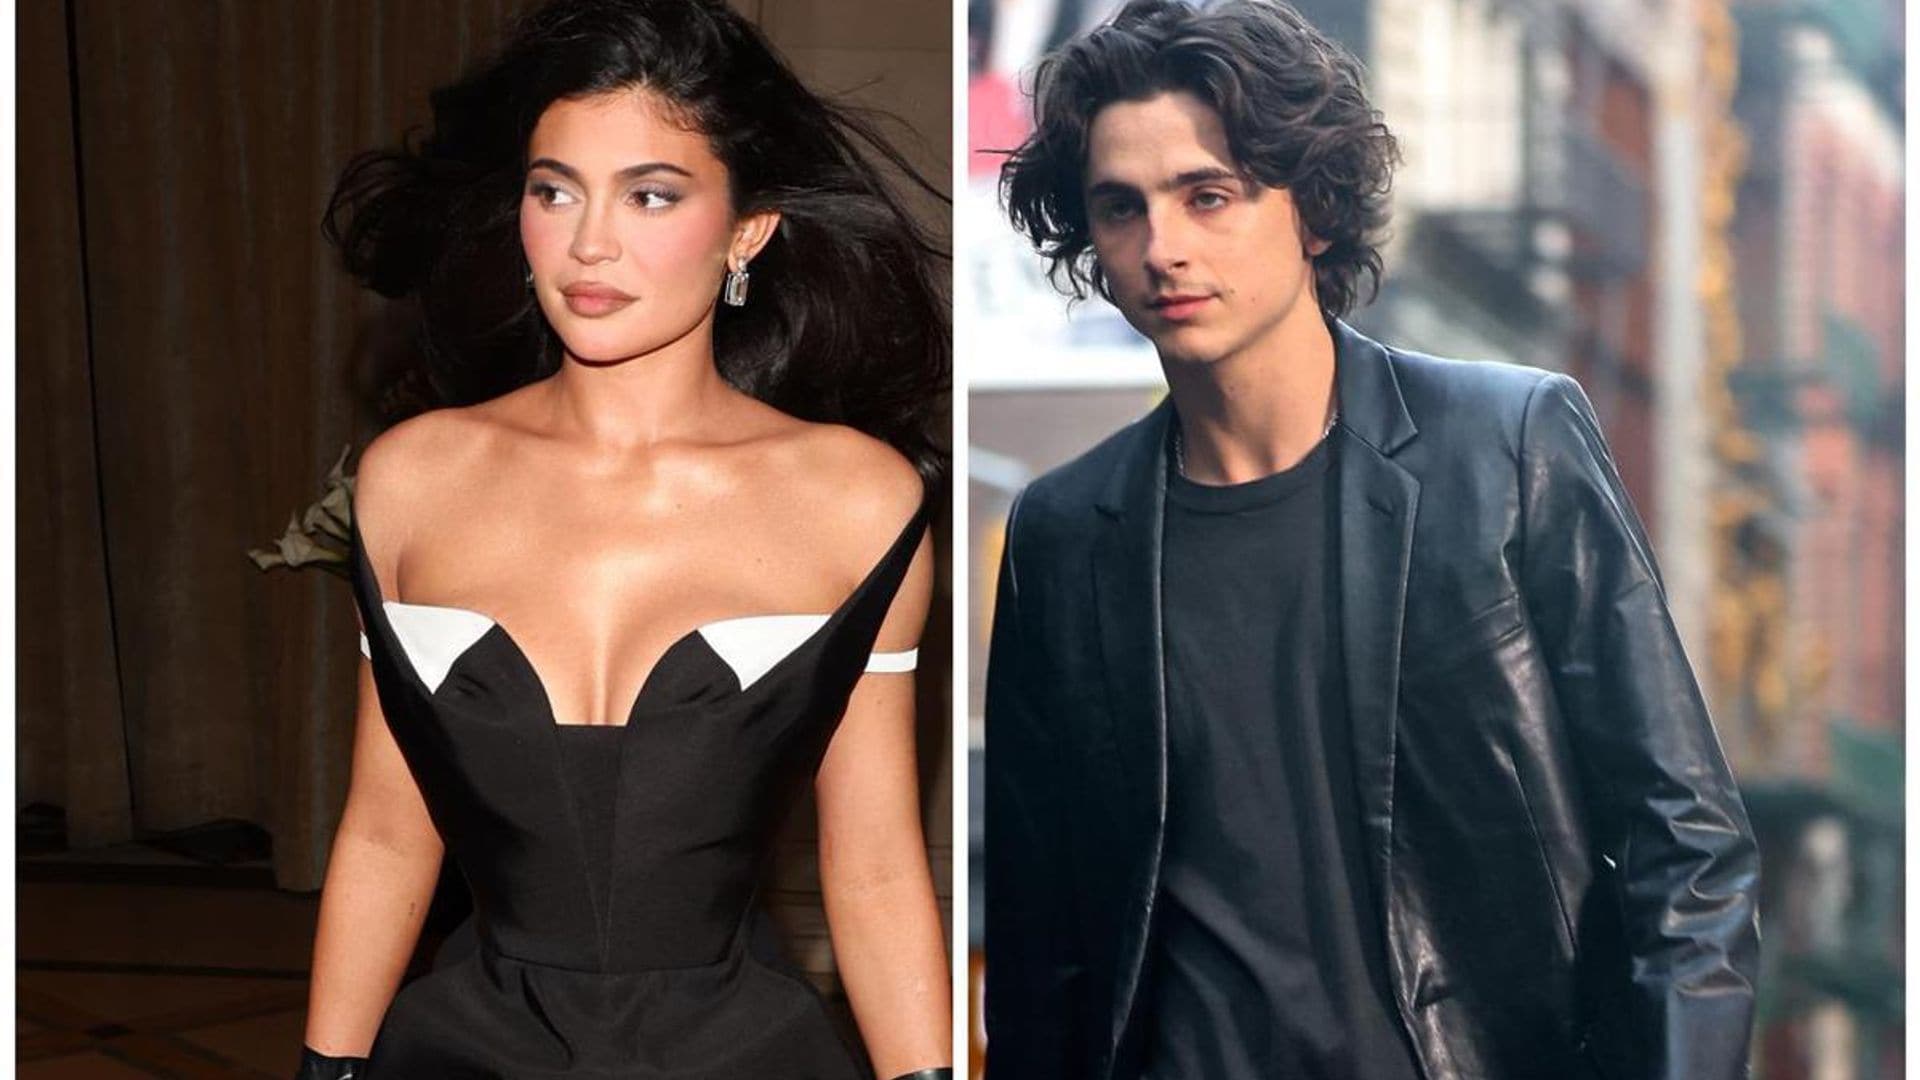 Kylie Jenner’s family approve Timothée Chalamet romance: ‘Different’ from others